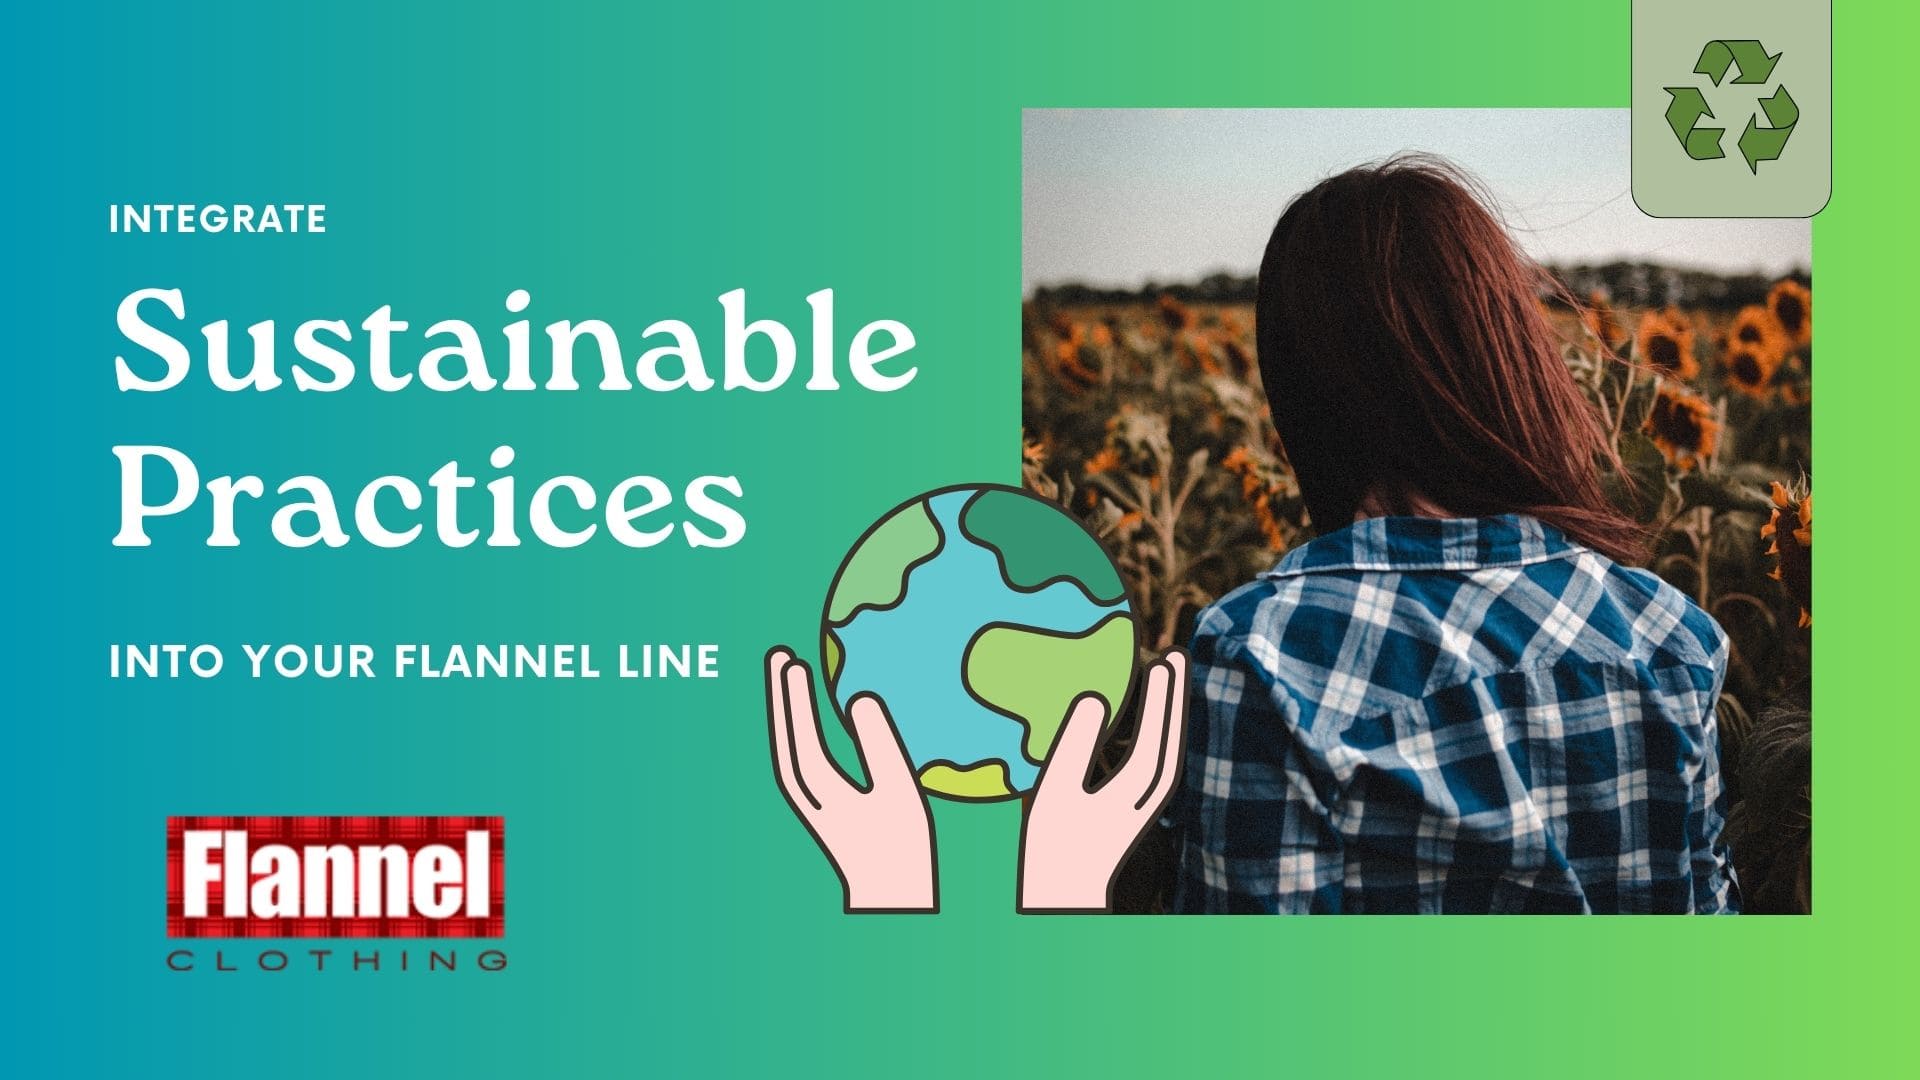 Integrate Sustainable Practices into Your Flannel Line